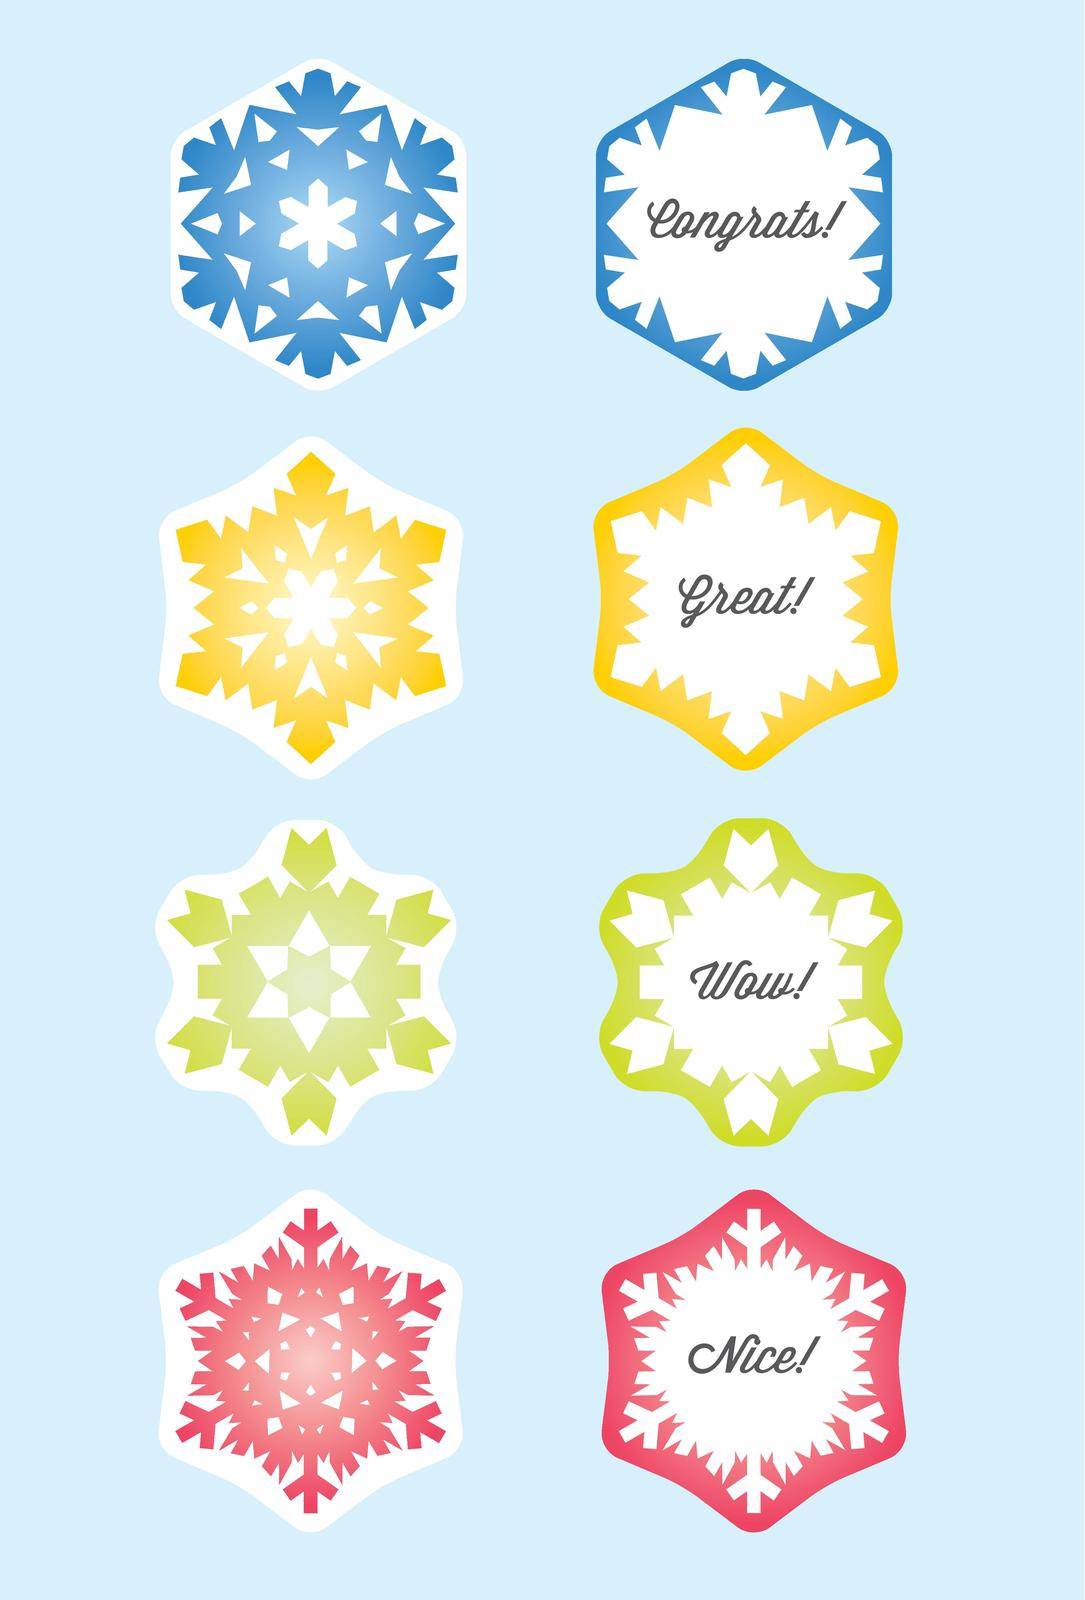 Vector Snowflake Gift Card or Present Card